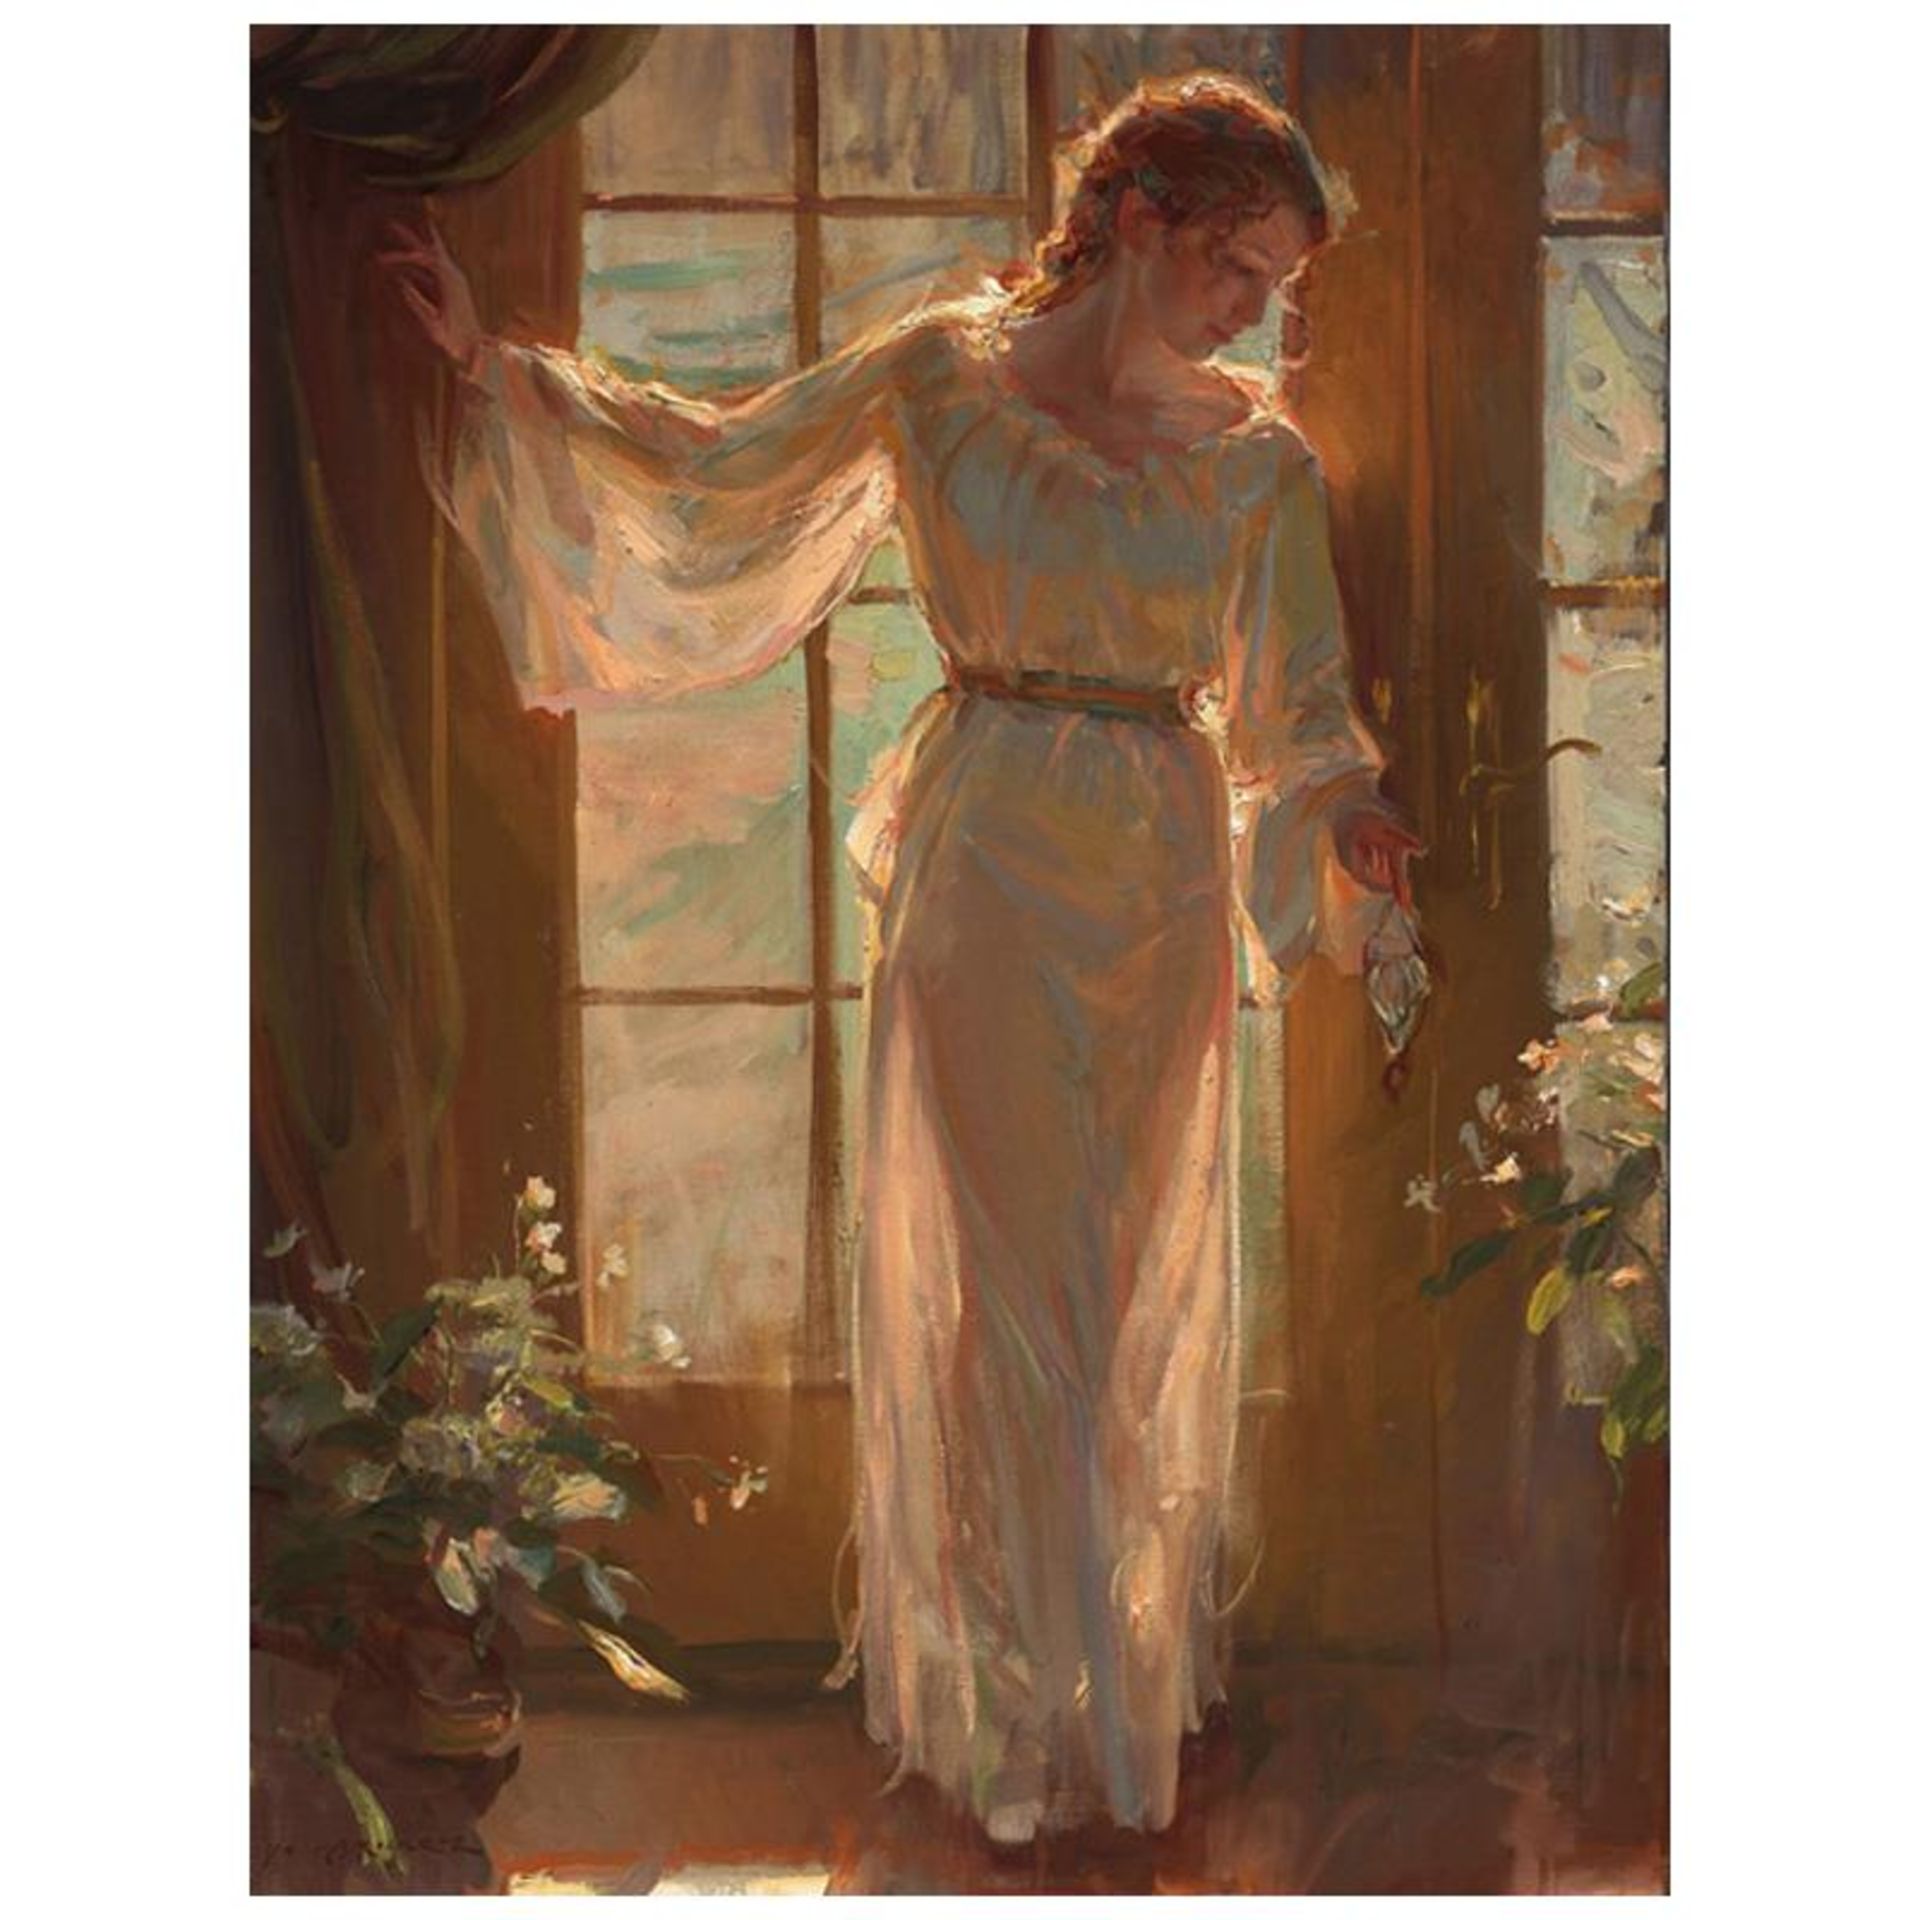 Dan Gerhartz, "Winter Garden" Limited Edition on Canvas, Numbered and Hand Signe